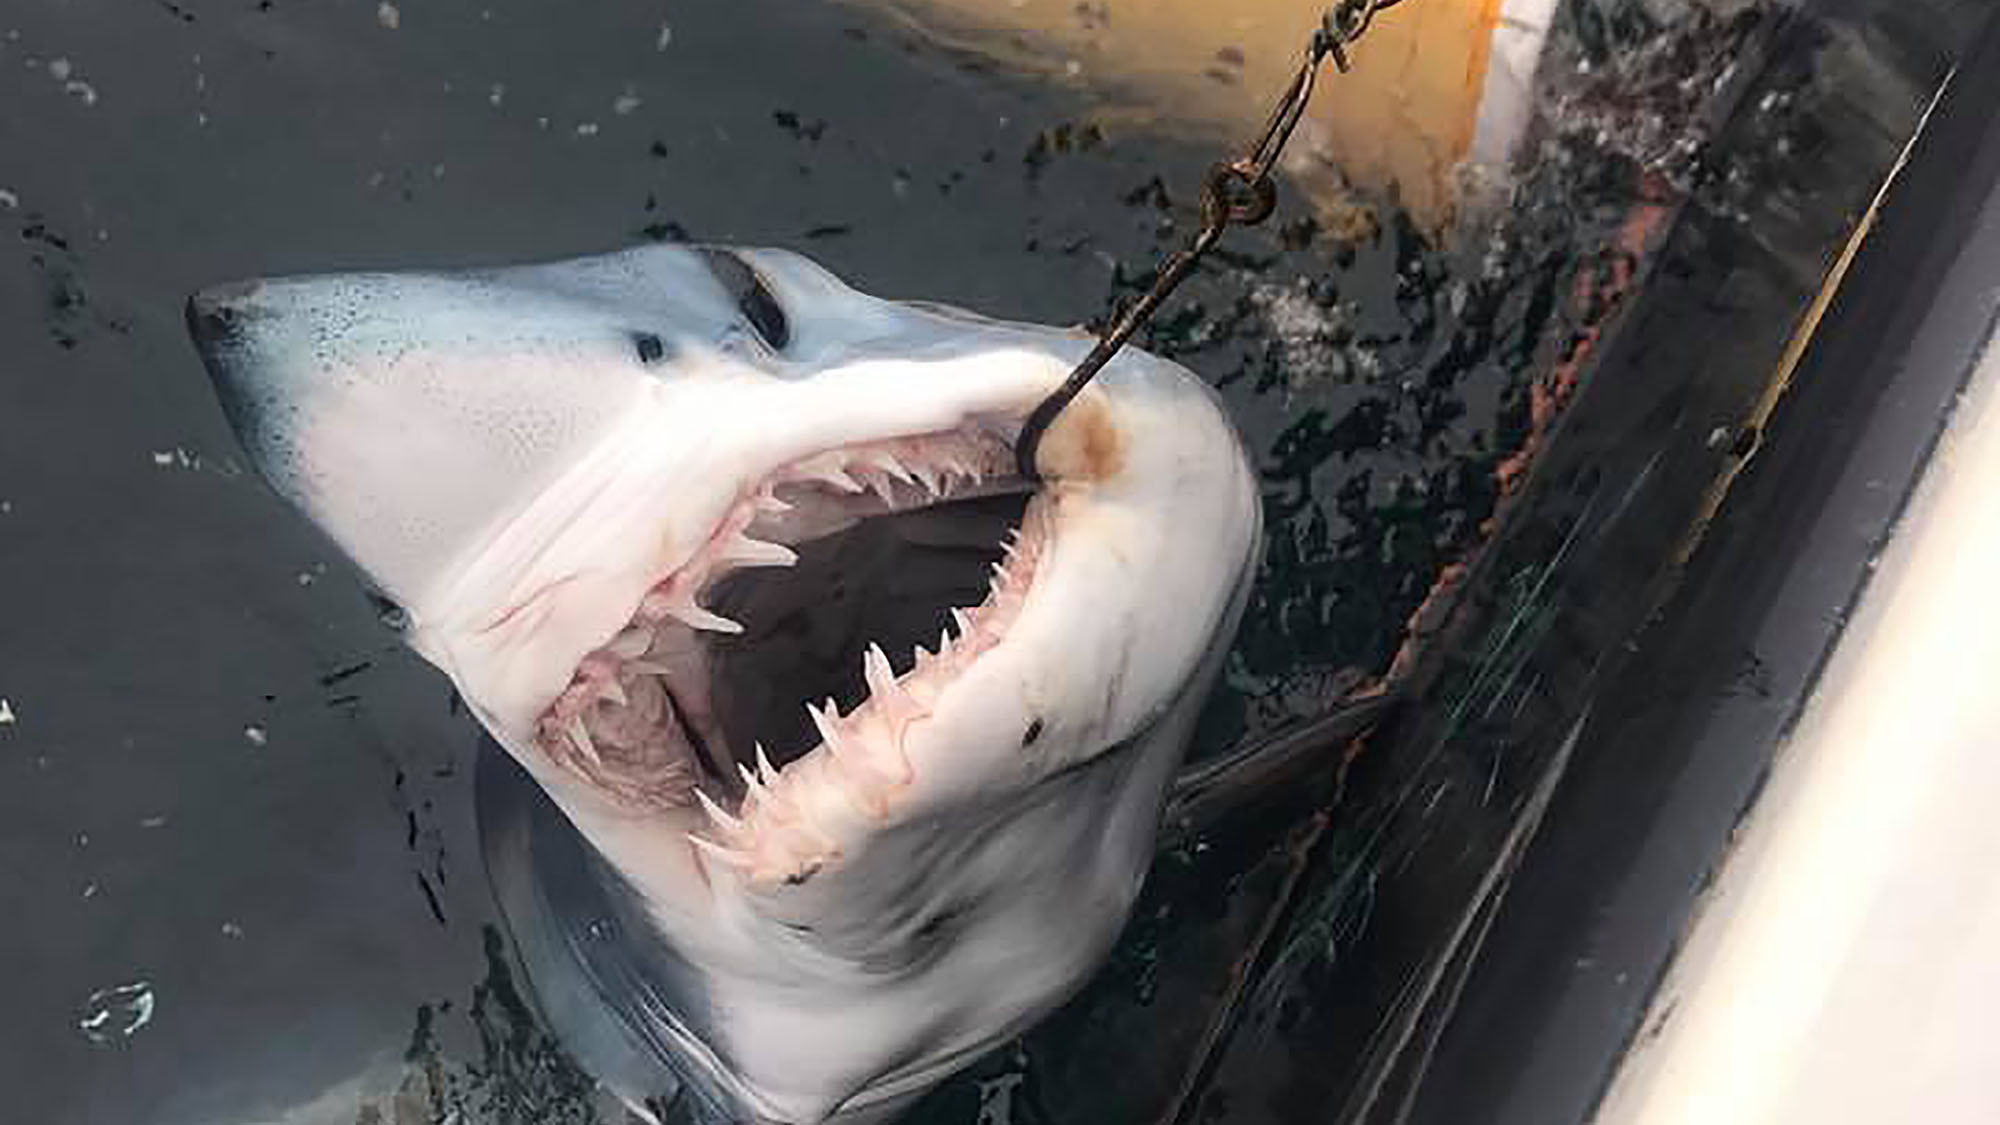 A blue shark is seen at the side of Gaetan's boat.